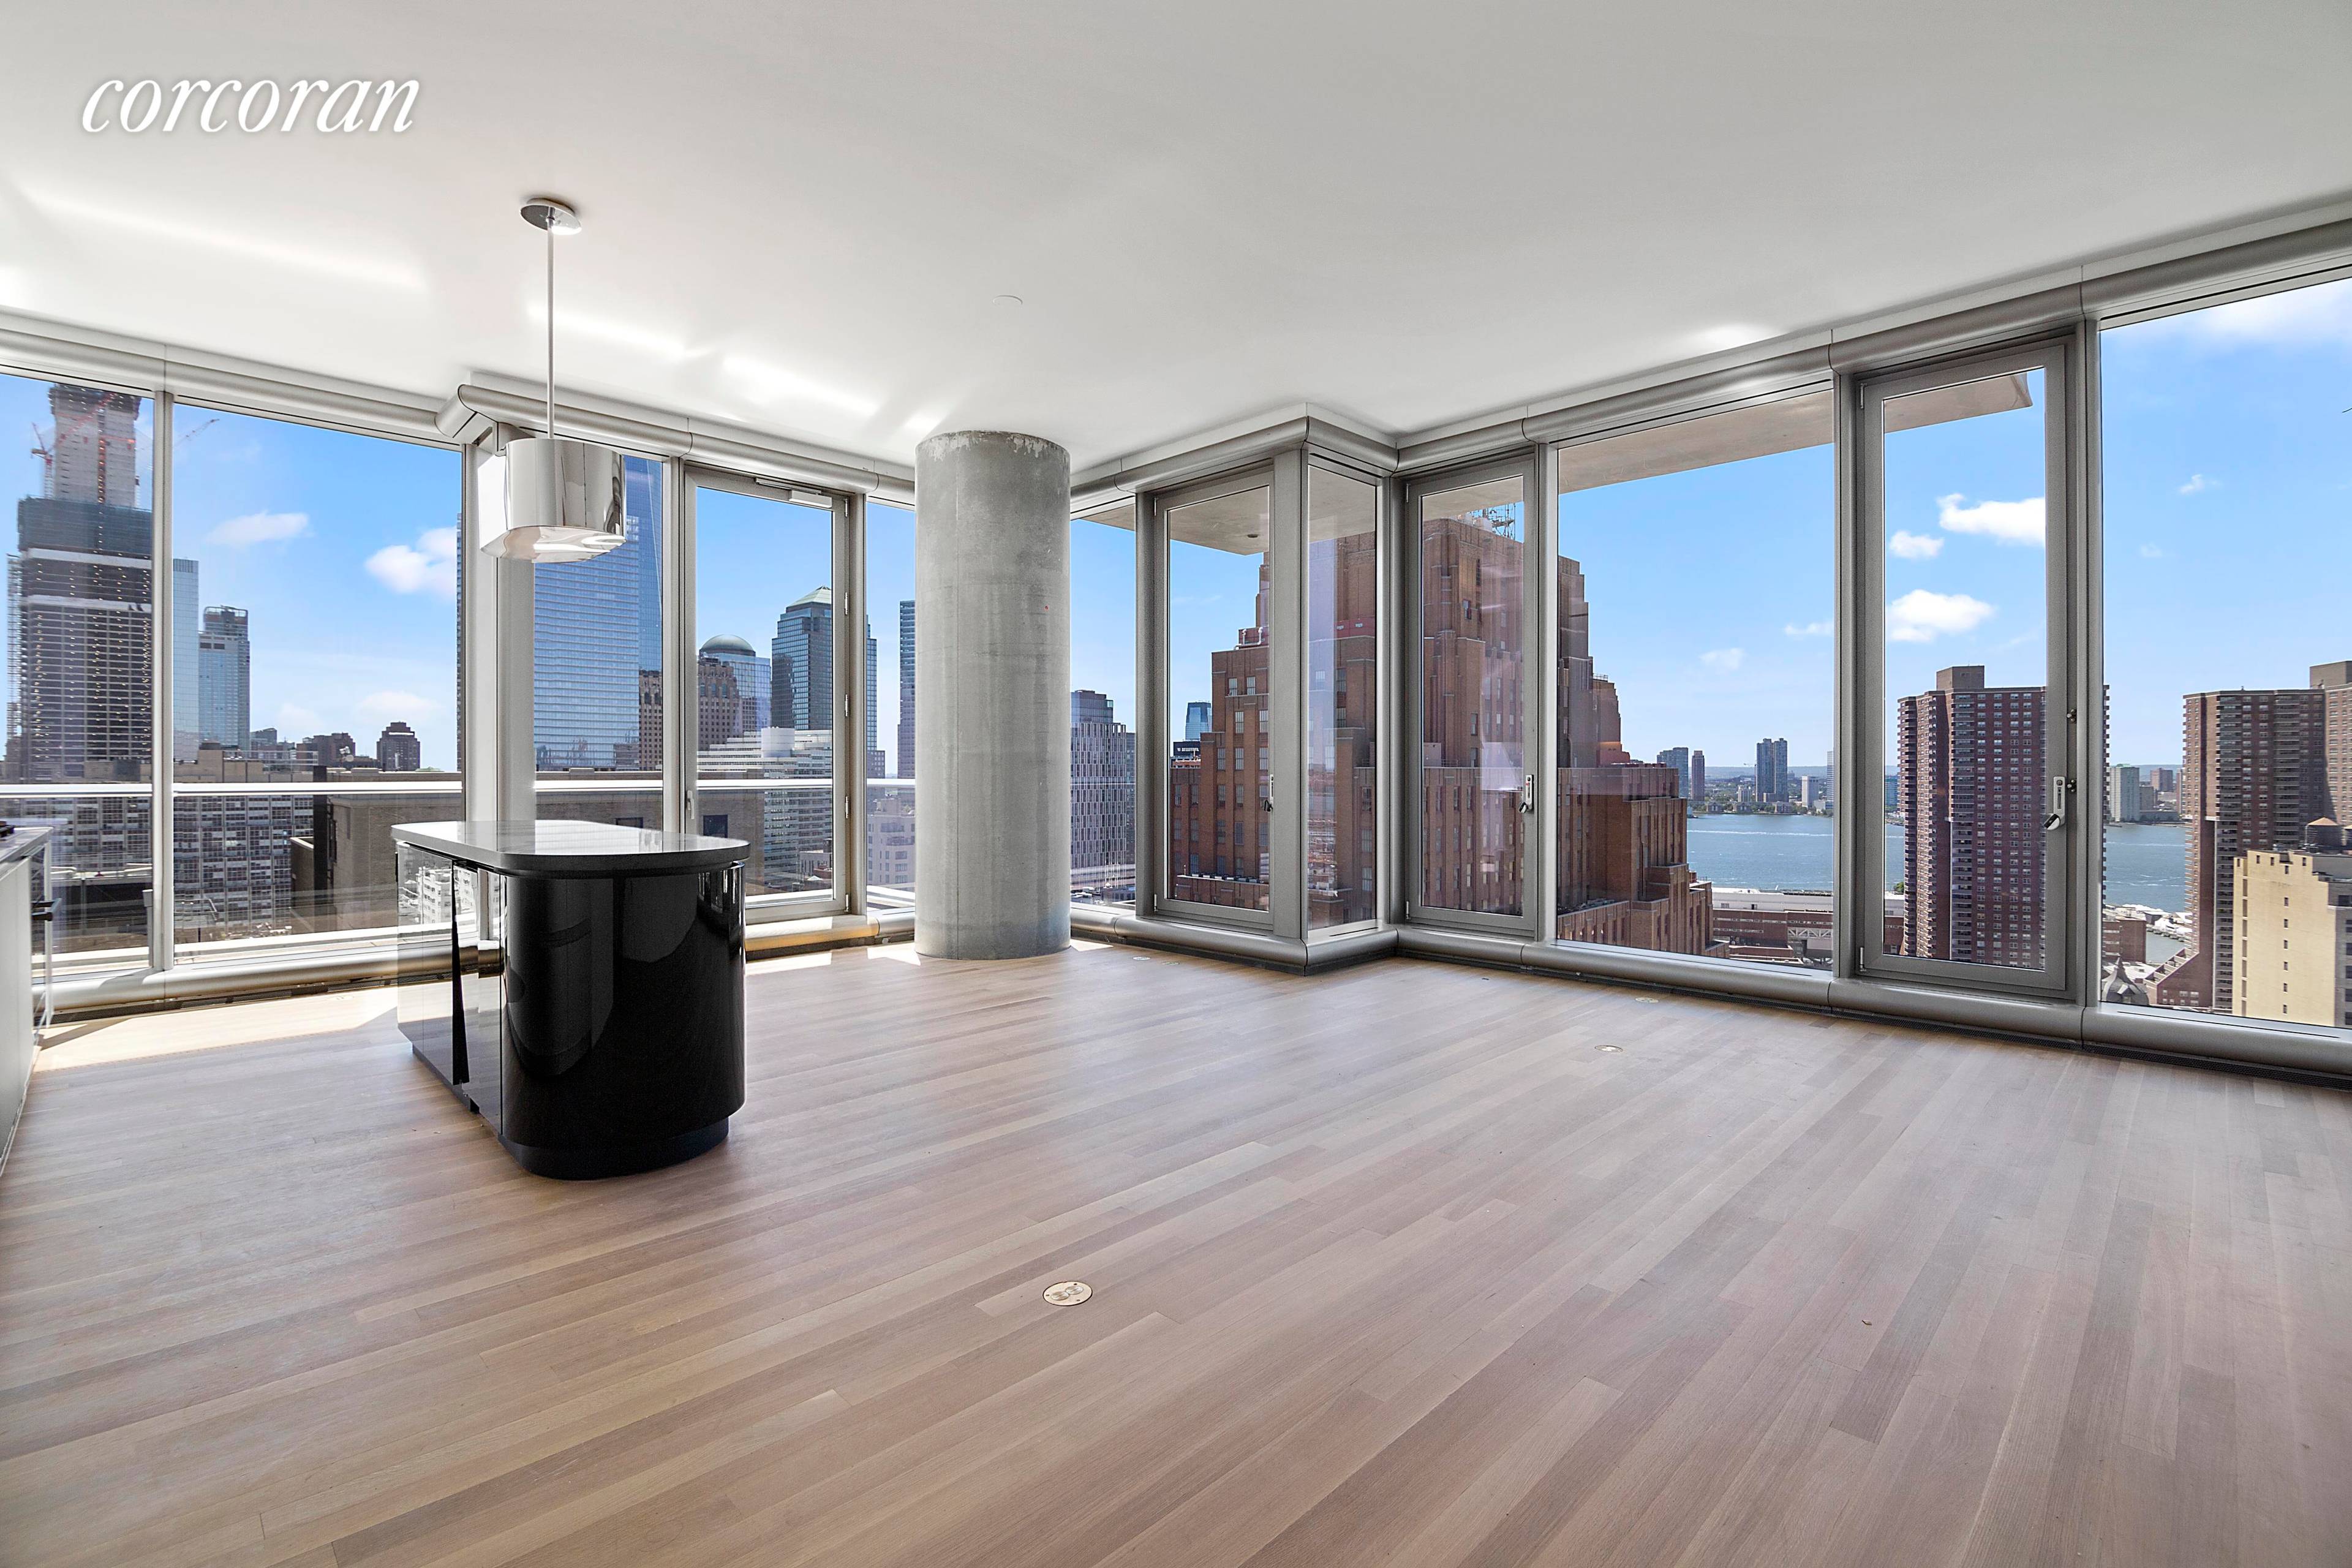 56 Leonard street condominium, designed by Pritzer Prize winning architects Herzog amp ; de Meuron rises 60 stories as a sculptural glass tower that is now recognized as one of ...